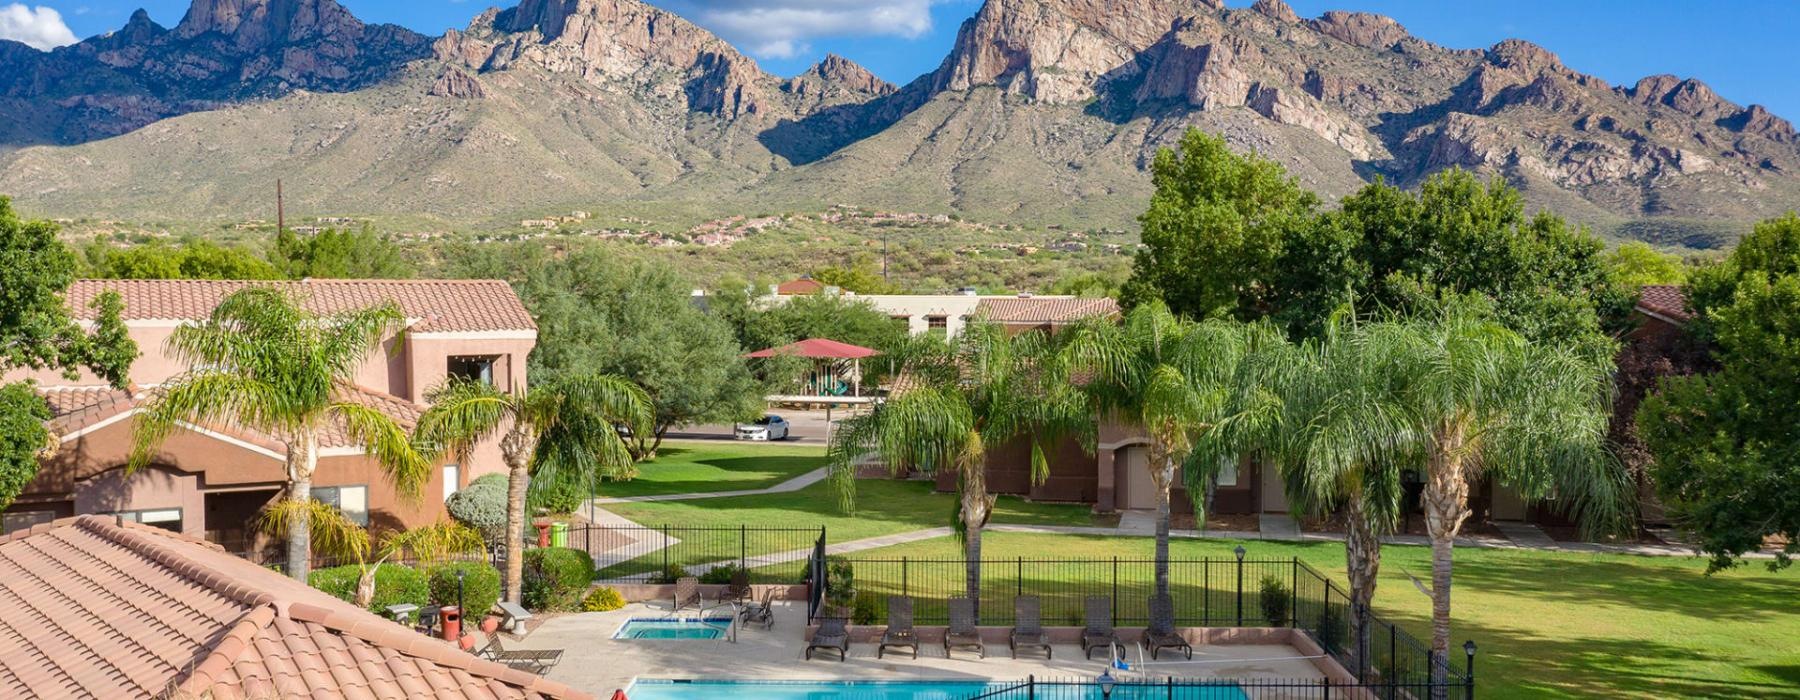 a pool in a backyard with mountains in the background